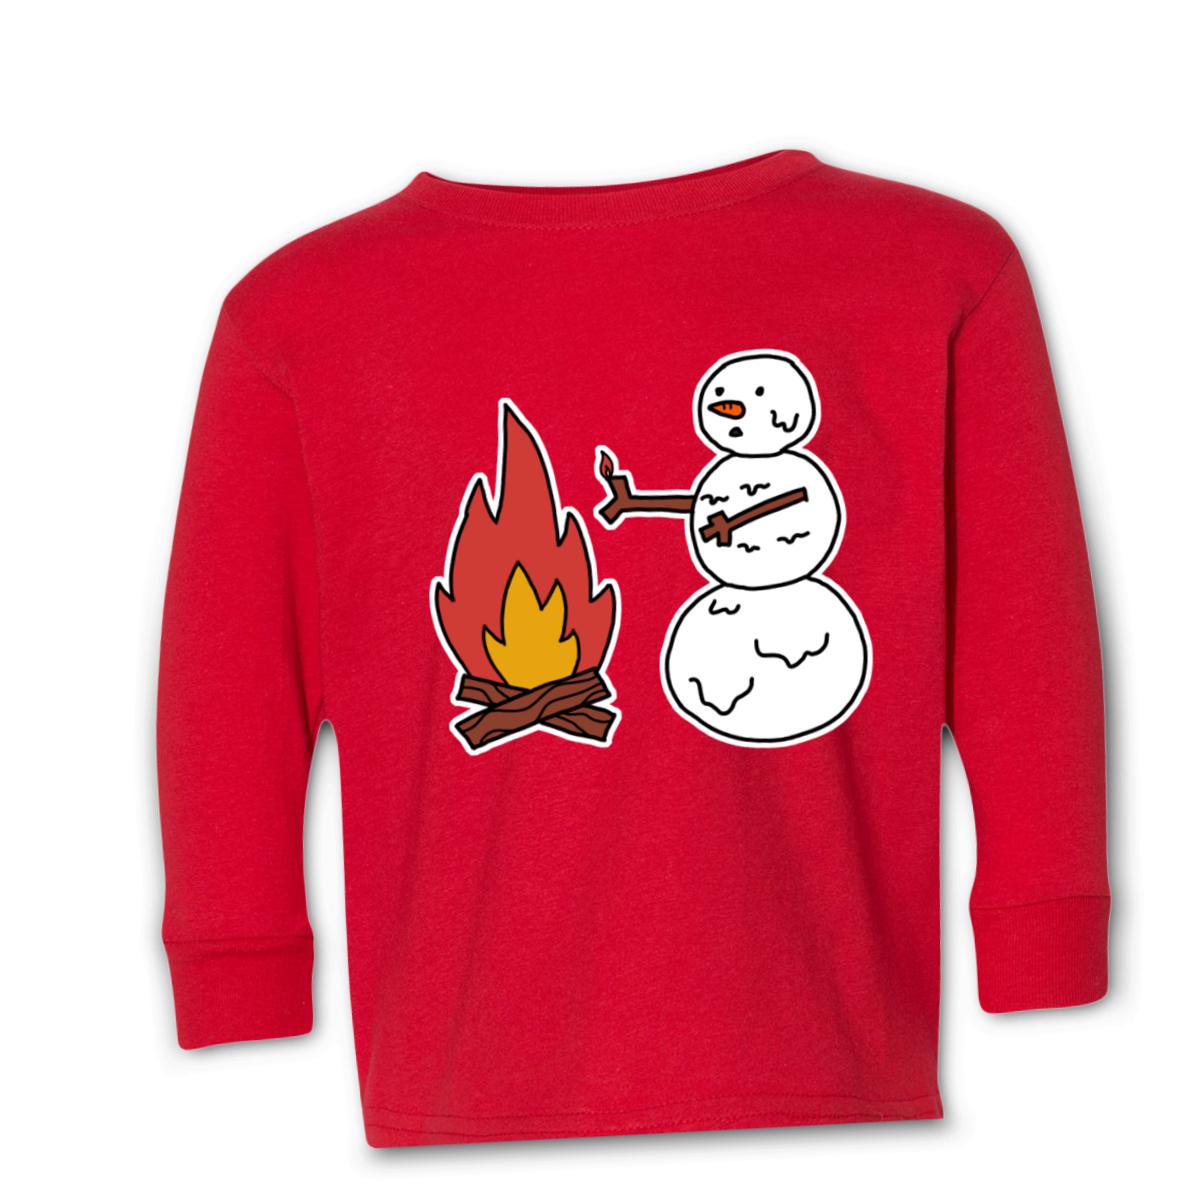 Snowman Keeping Warm Toddler Long Sleeve Tee 4T red